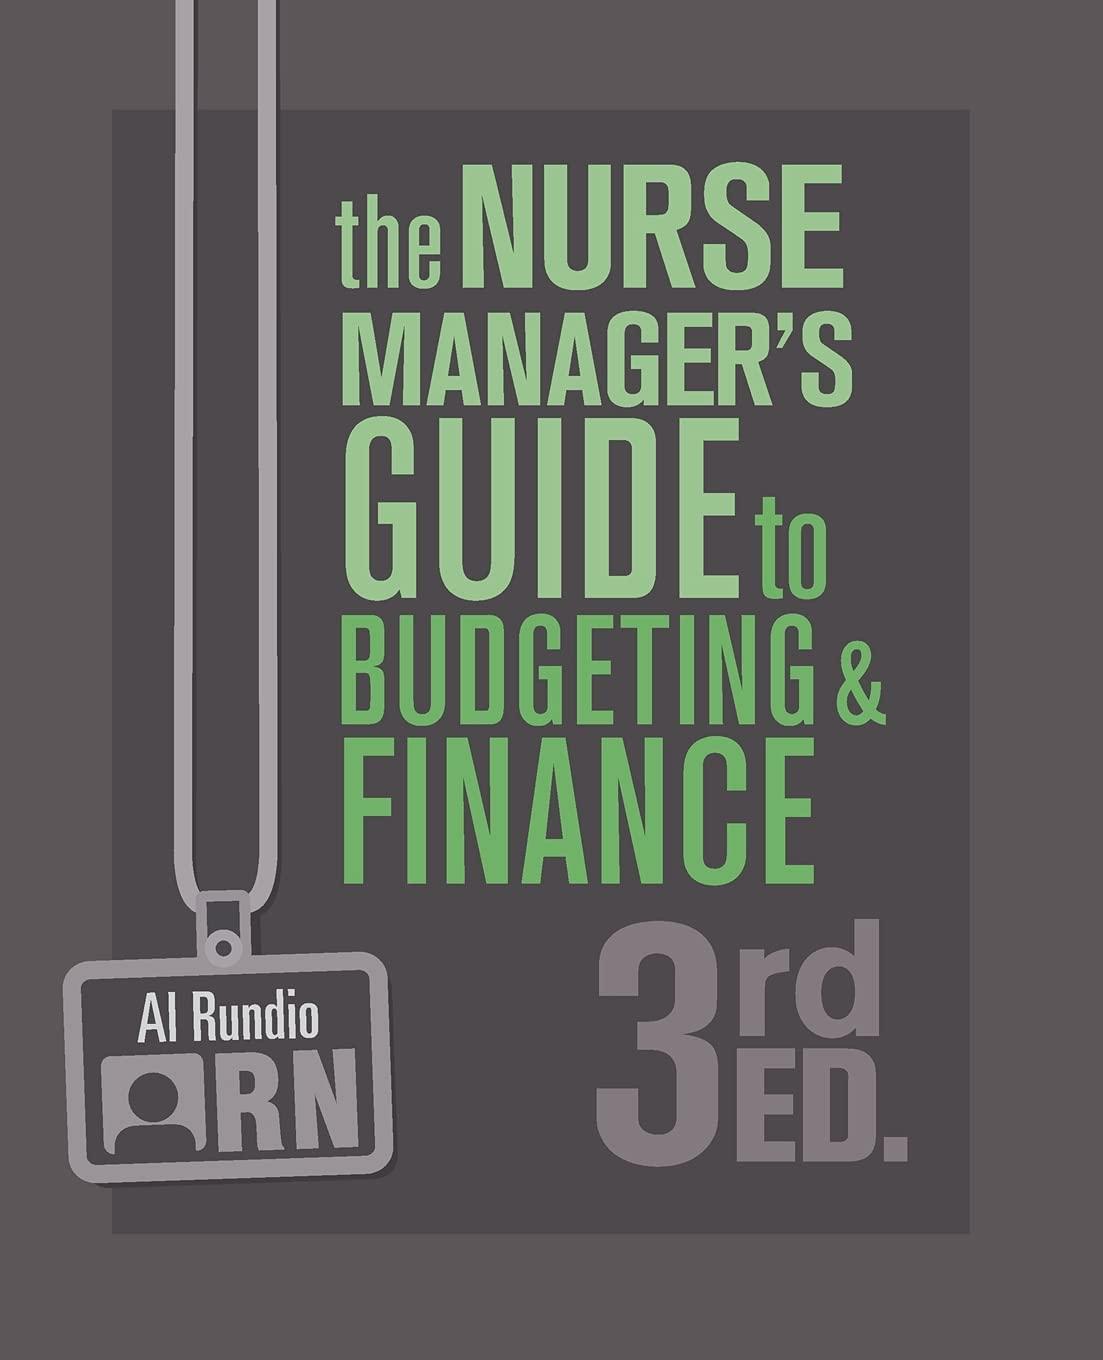 the nurse managers guide to budgeting and finance 3rd edition al rundio 1646480155, 978-1646480159